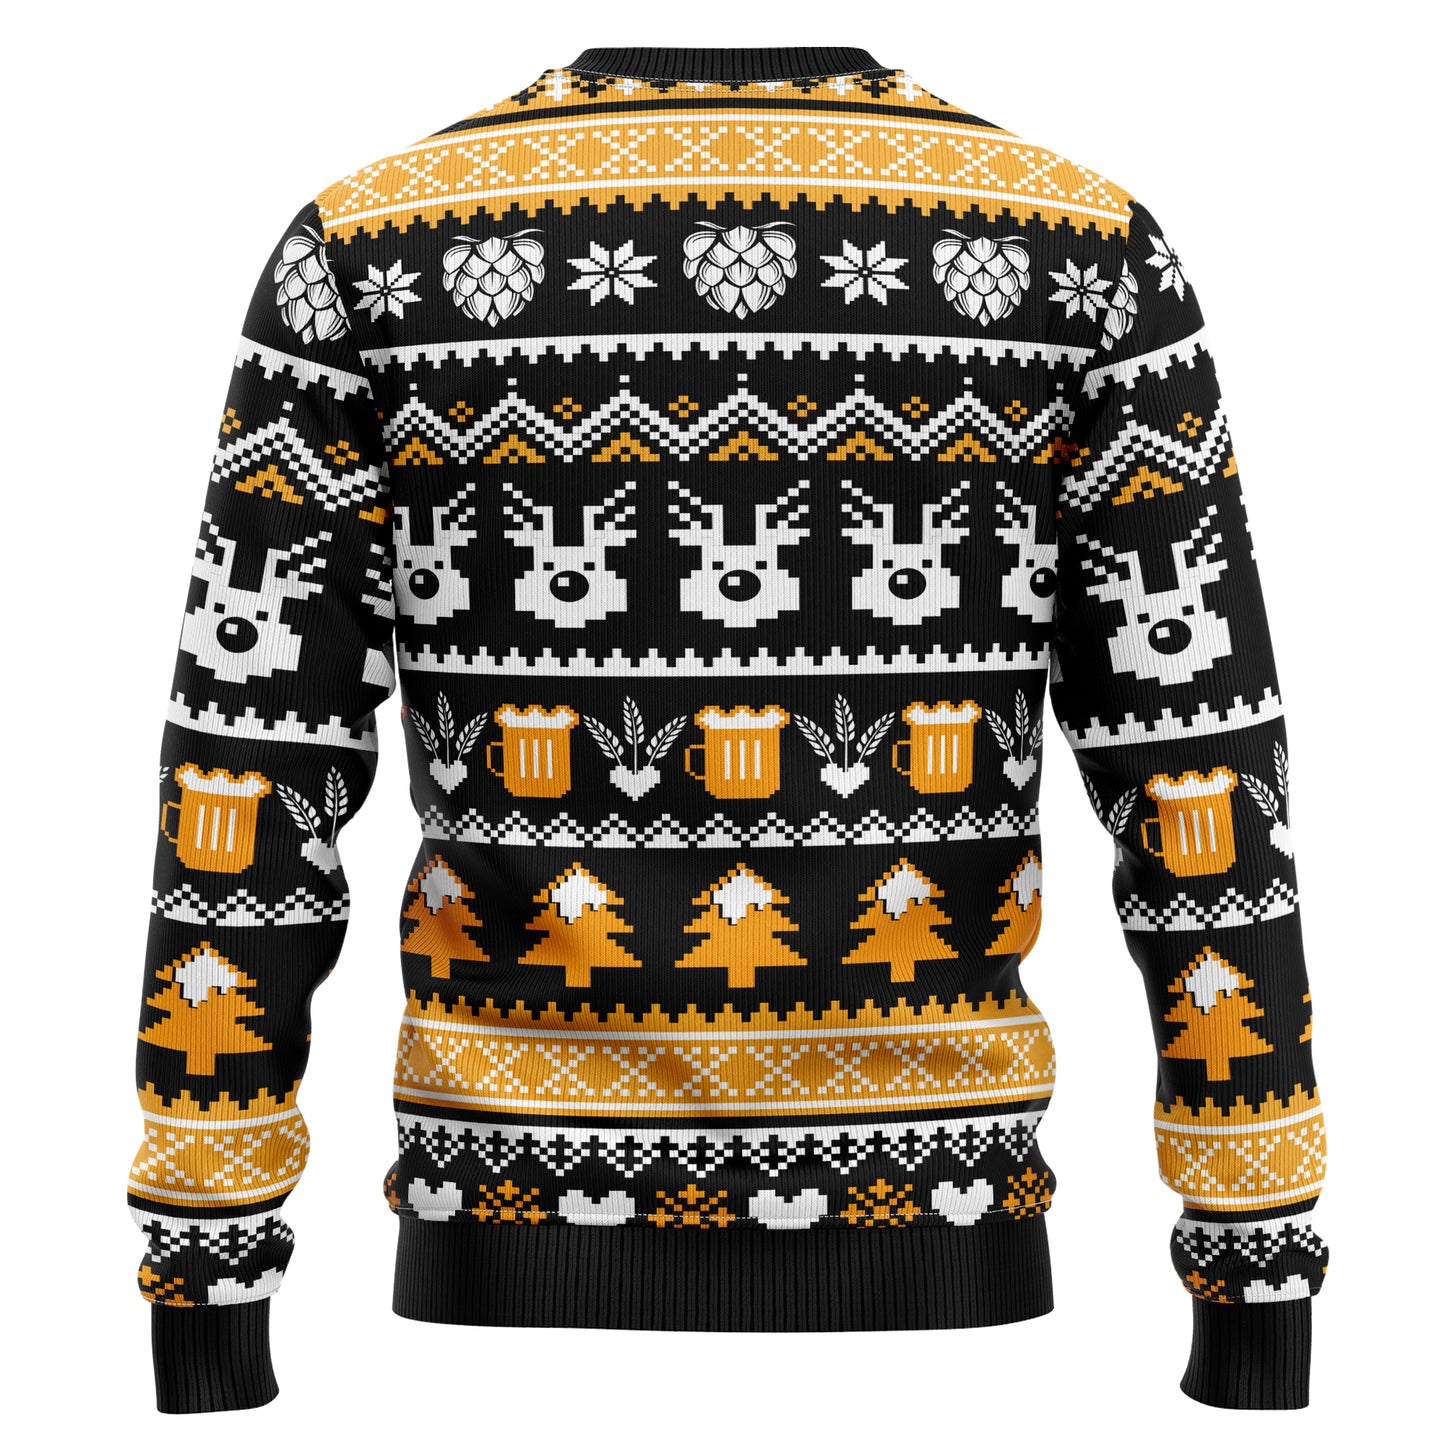 Wonderful Time For A Beer D2809 Ugly Christmas Sweater